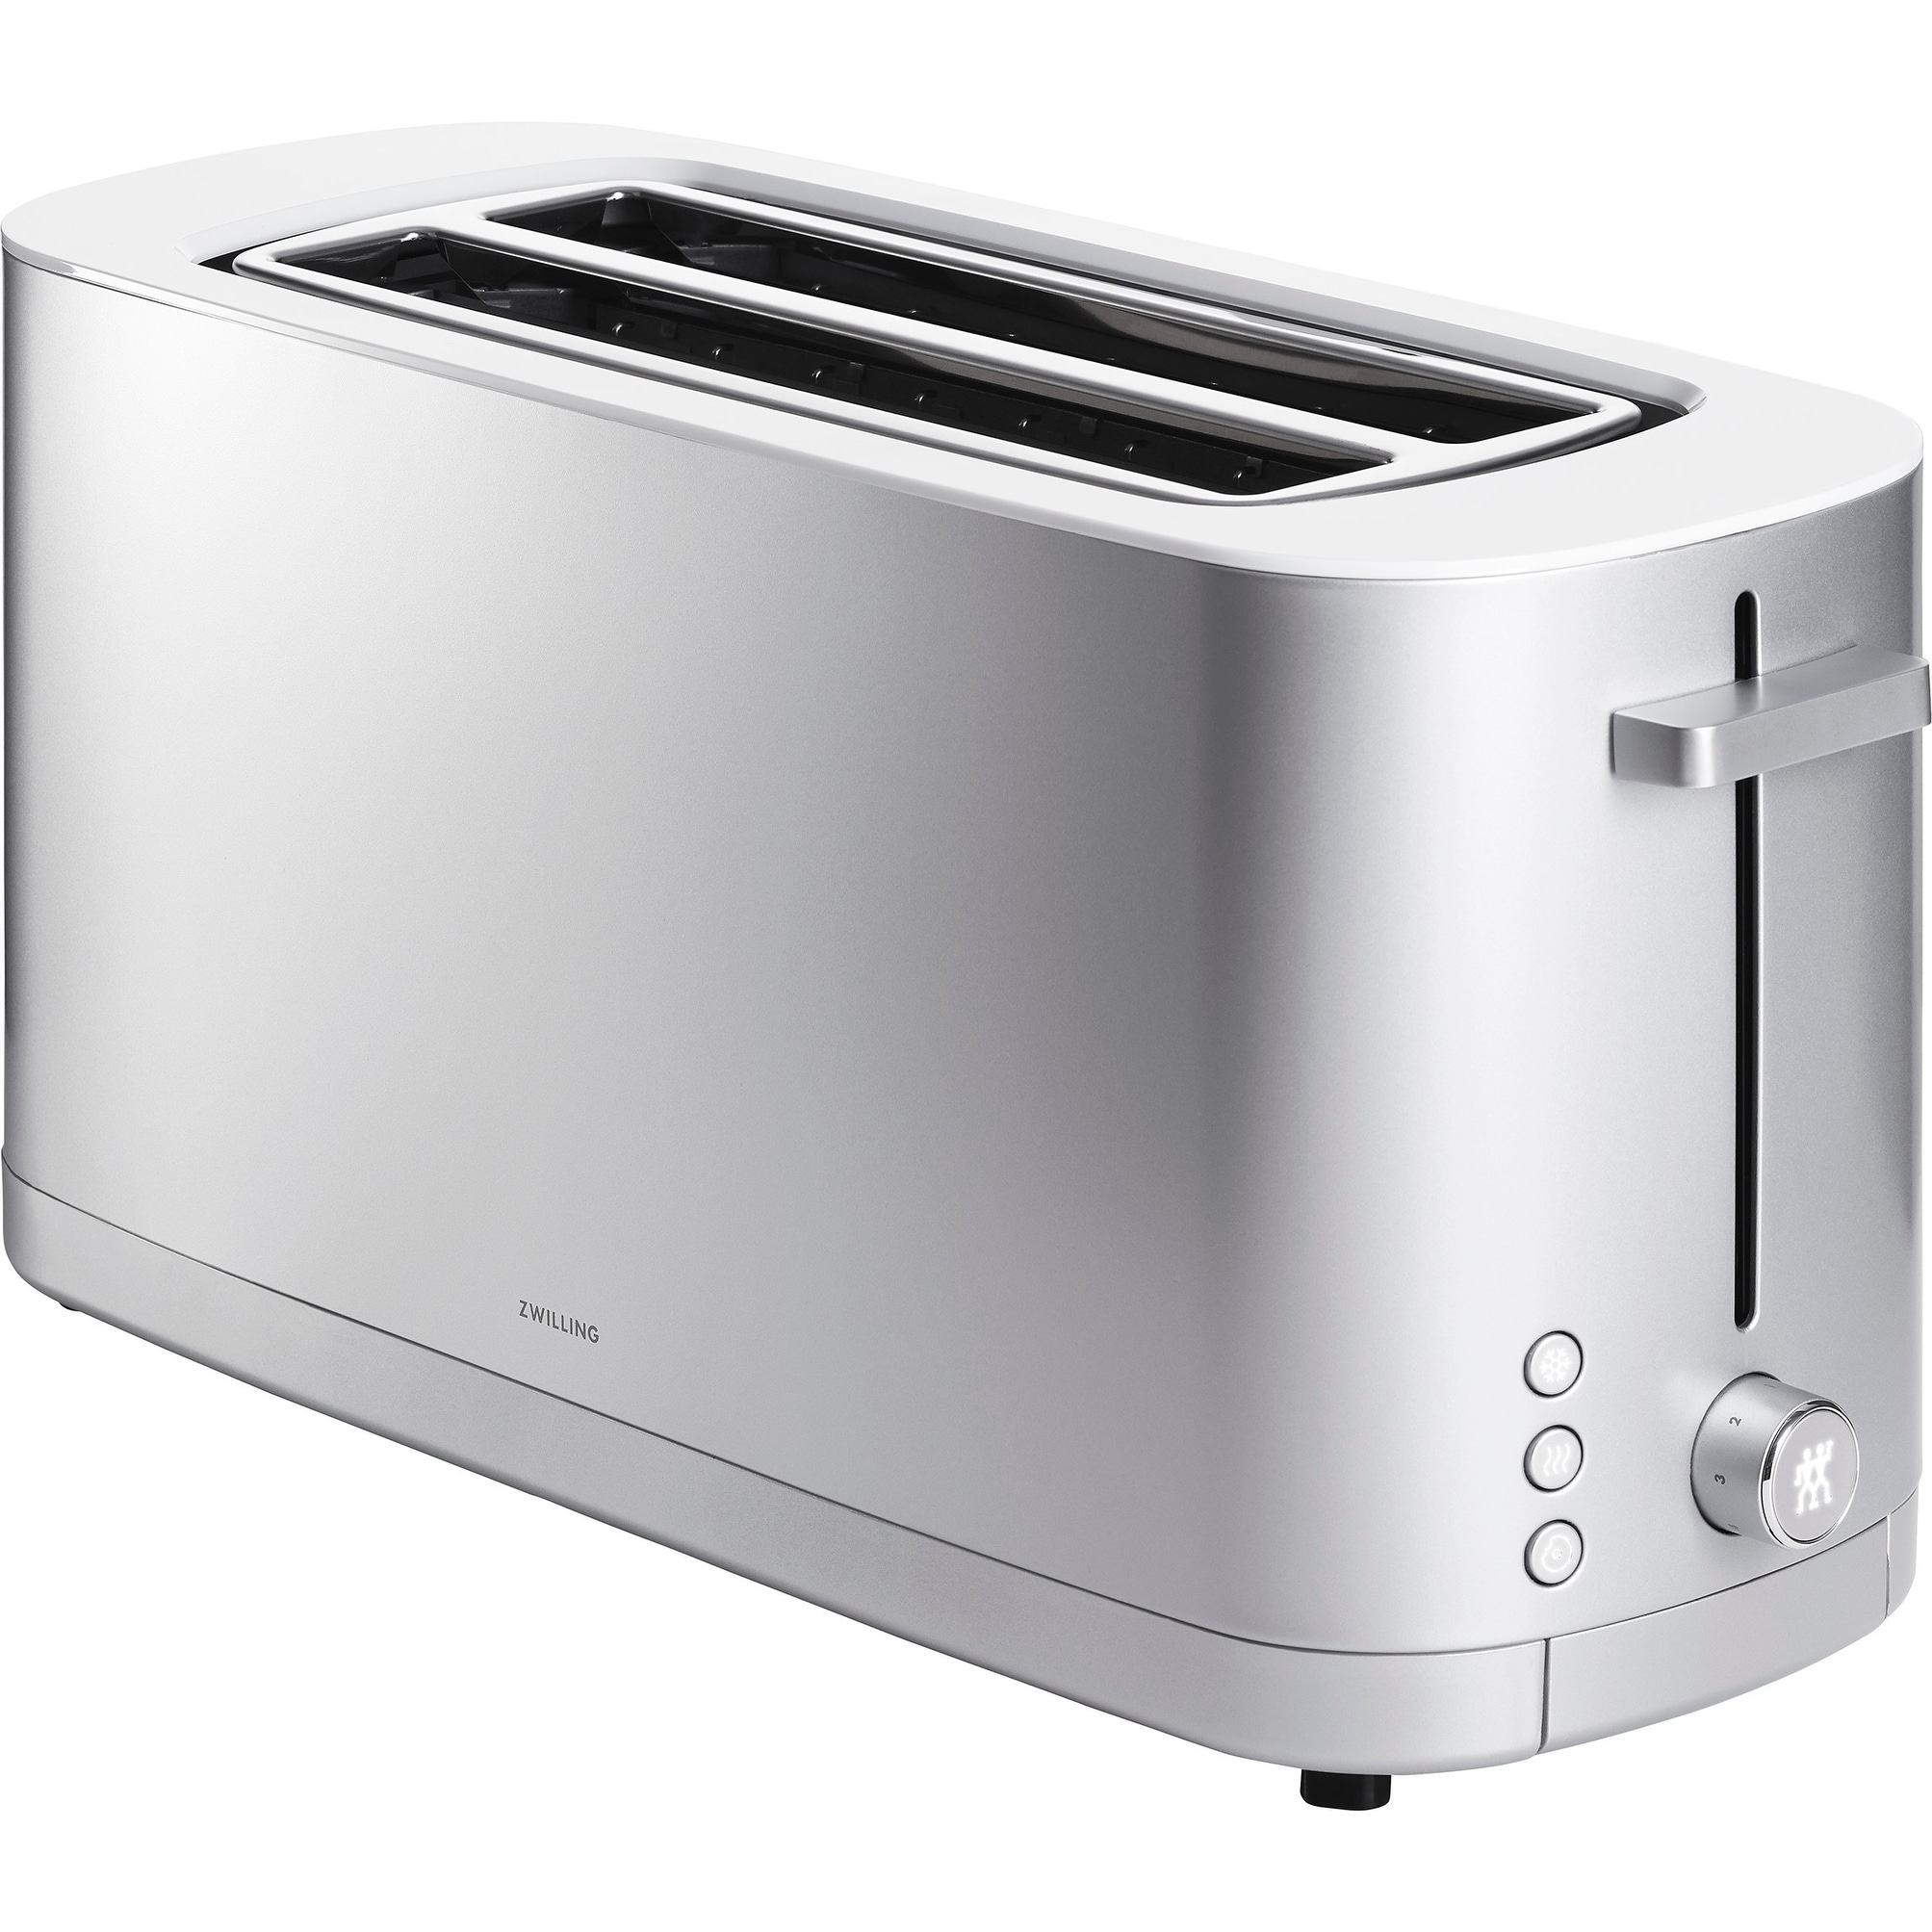 https://ak1.ostkcdn.com/images/products/is/images/direct/25162a52b8049a2b7ba194ccf6677043df52321b/ZWILLING-Enfinigy-2-Long-Slot-Toaster.jpg